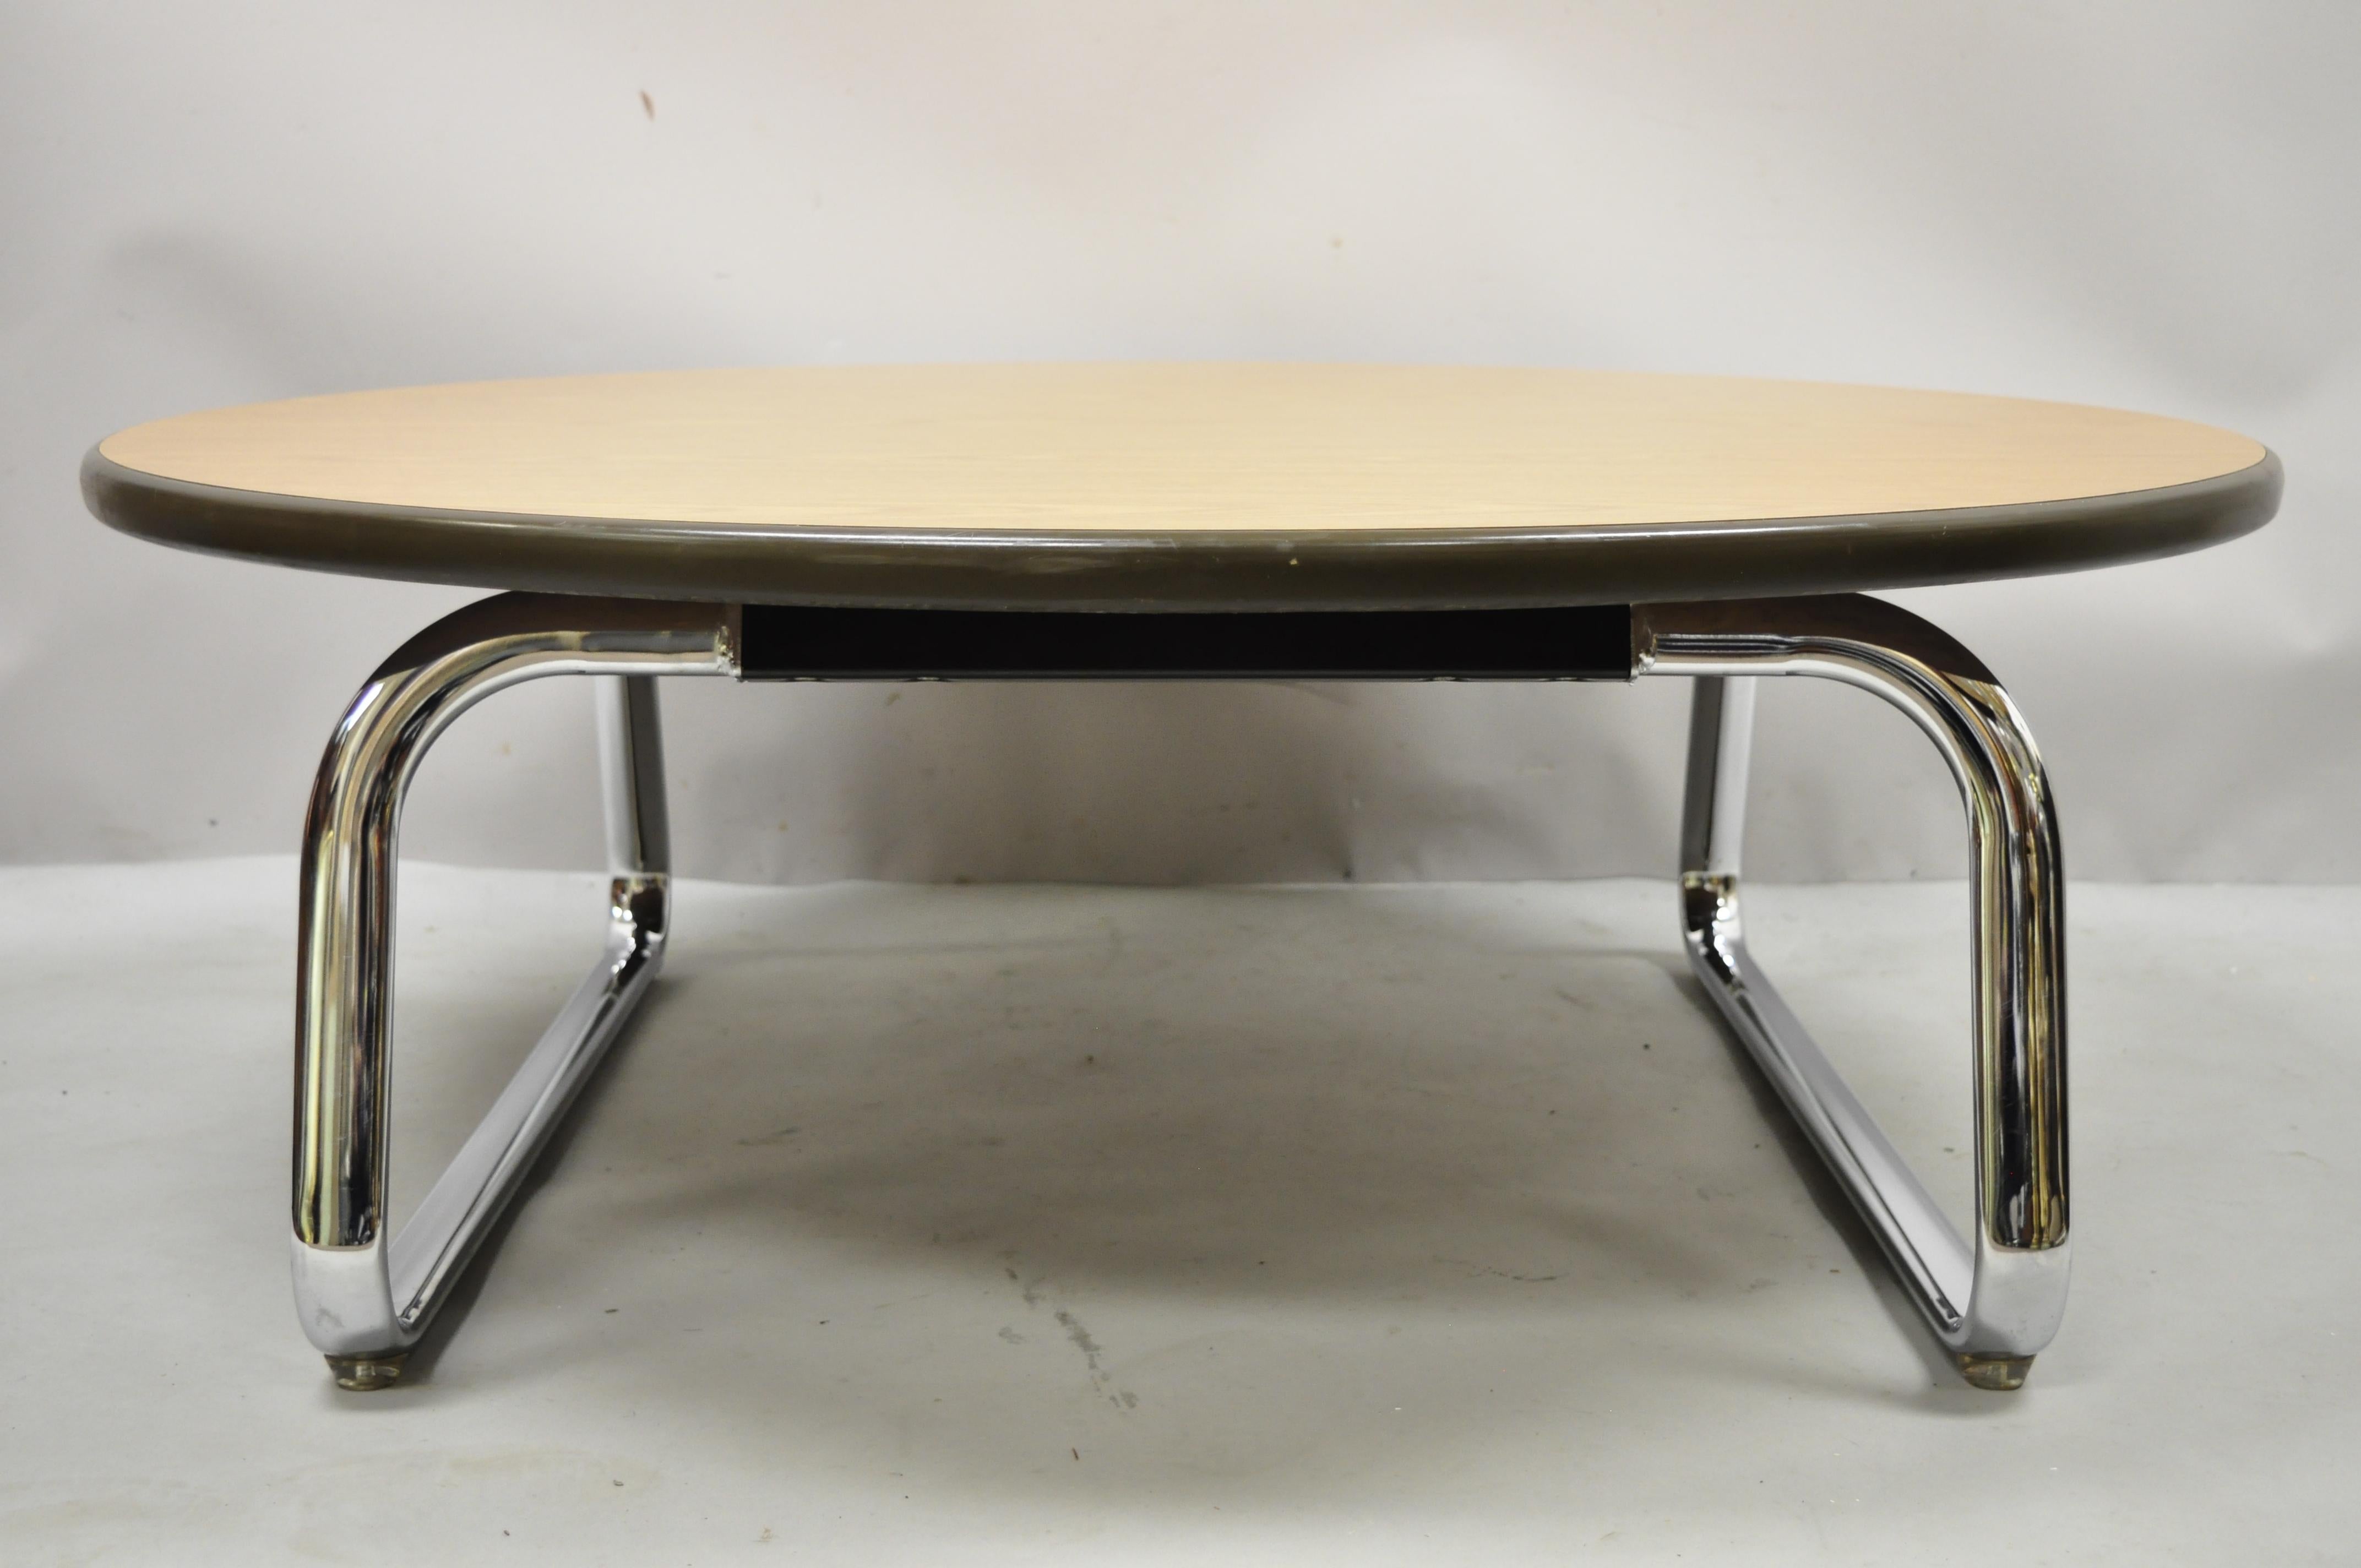 Steelcase chrome base round Formica top Mid-Century Modern office coffee table. Item features round formica top in faux wood grain, original label, very nice vintage item, clean modernist lines, great style and form, Circa late 20th century.